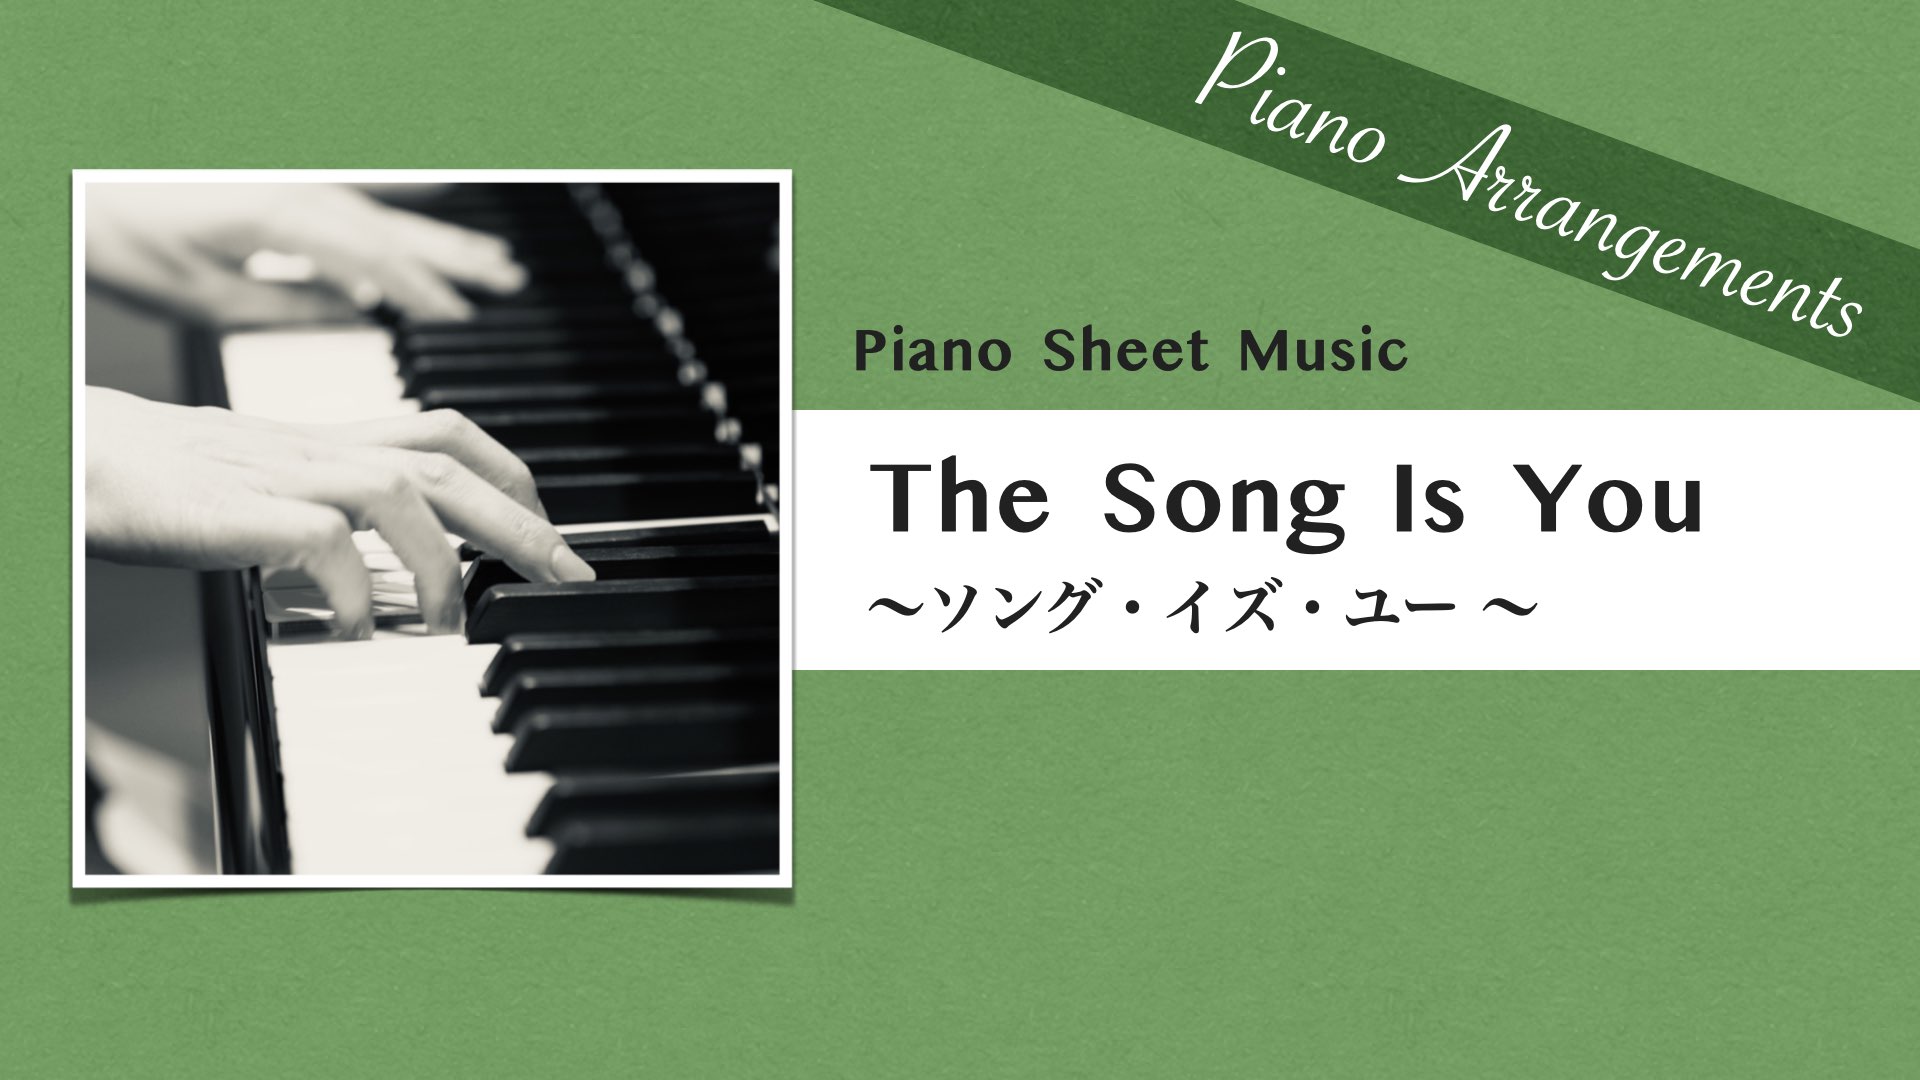 The Song Is You【Piano Sheet Music】